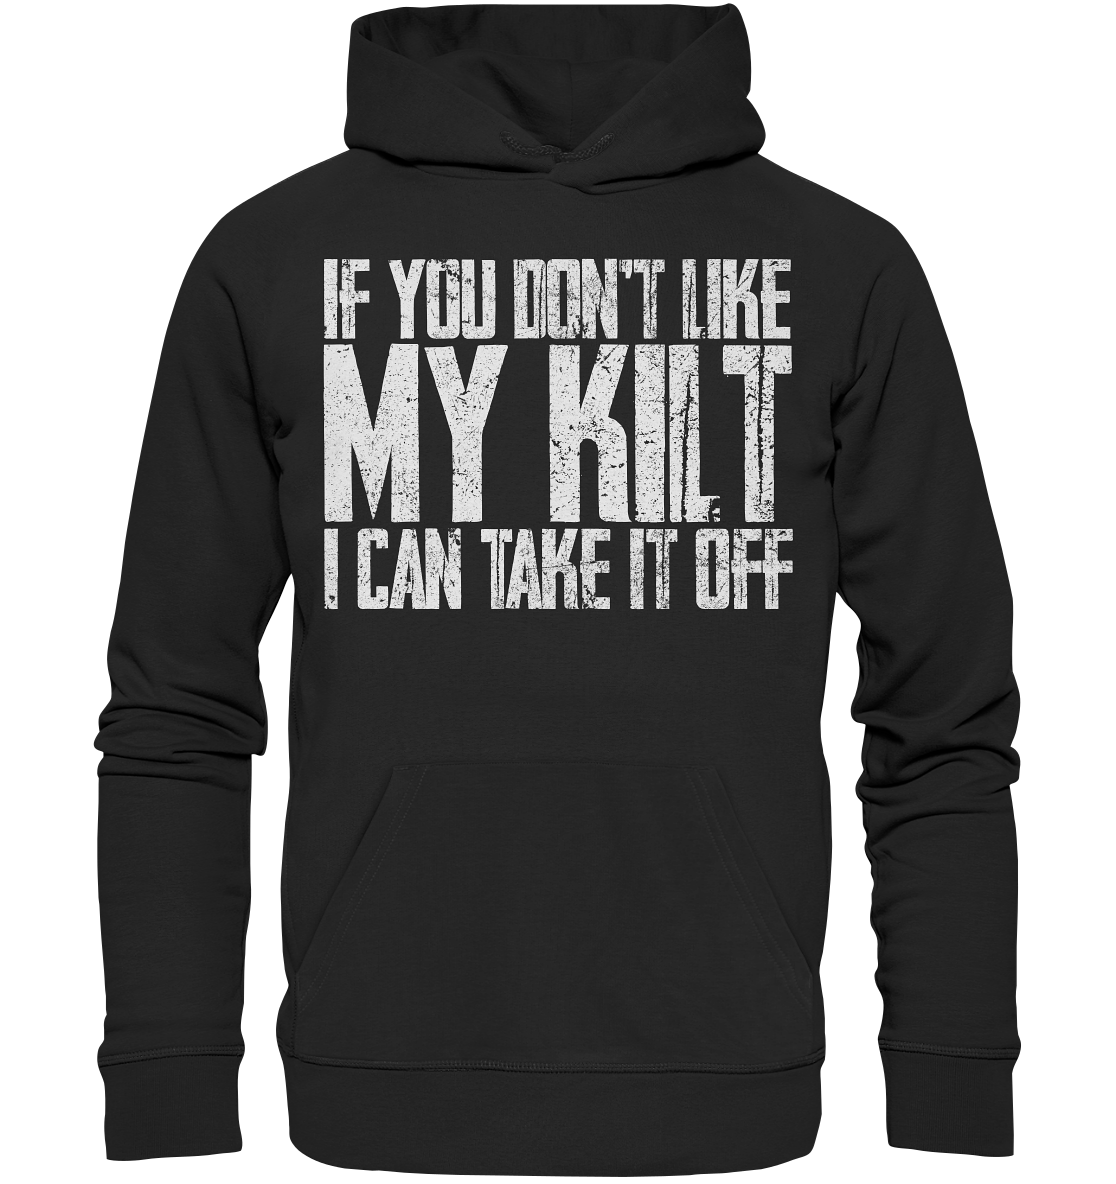 If You Don't Like My Kilt, I Can Take It Off - Premium Unisex Hoodie